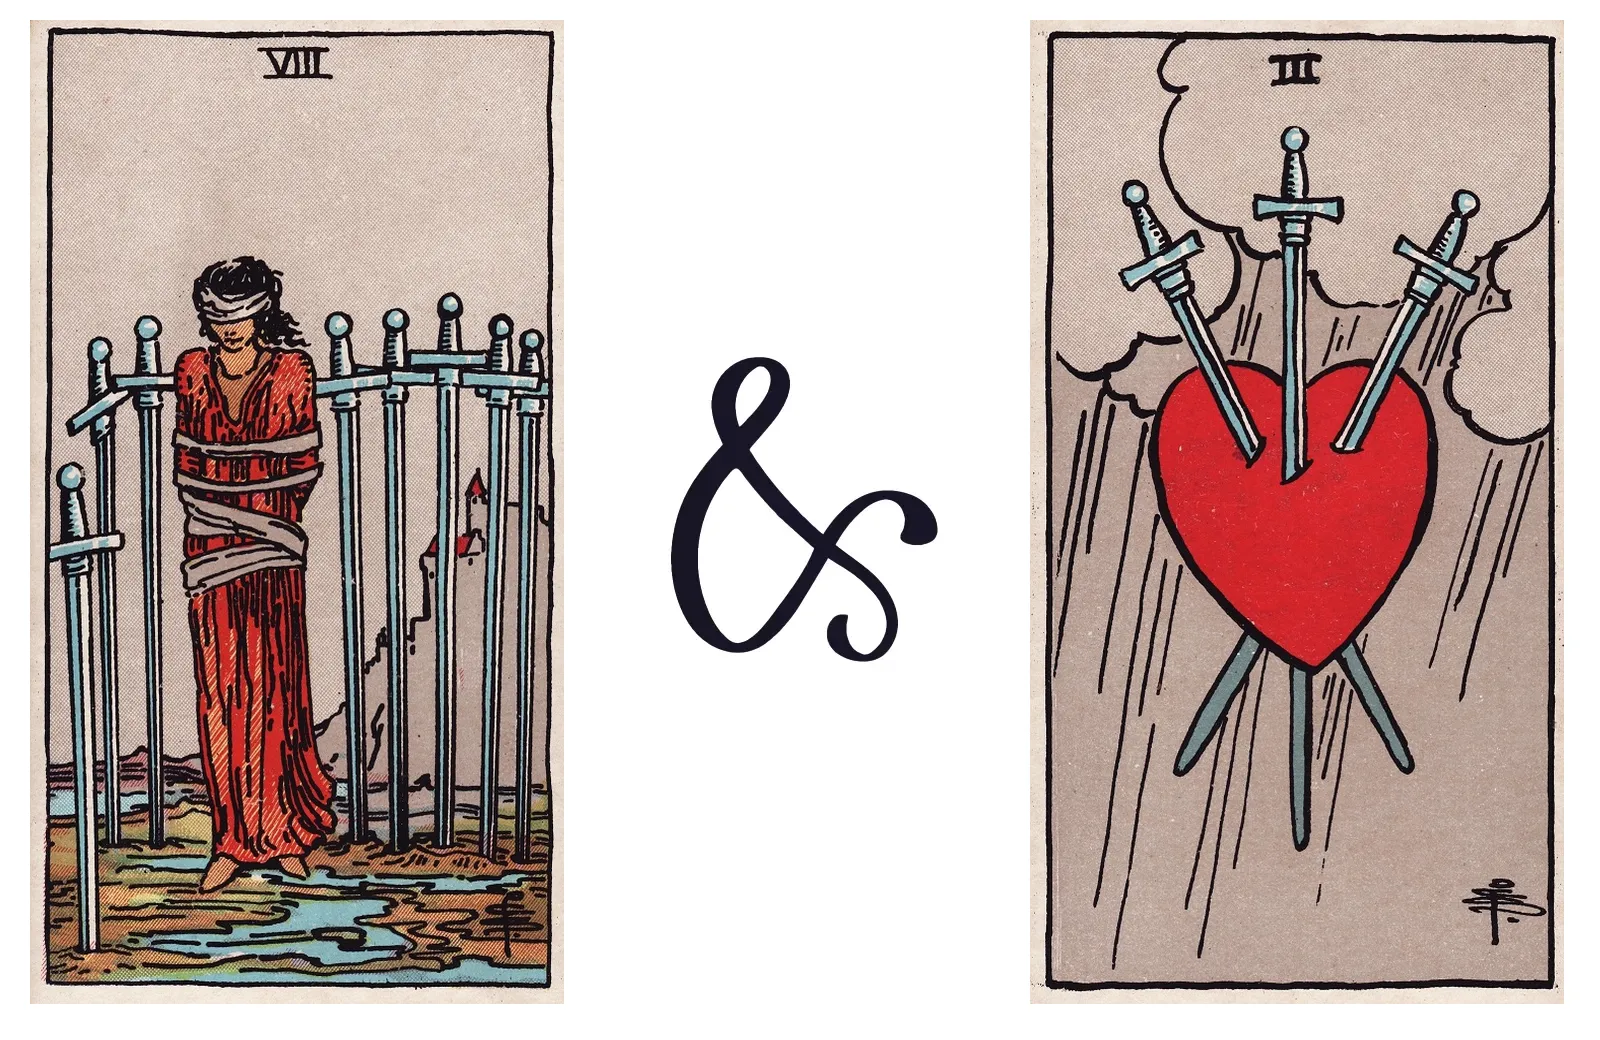 Eight of Swords and Three of Swords